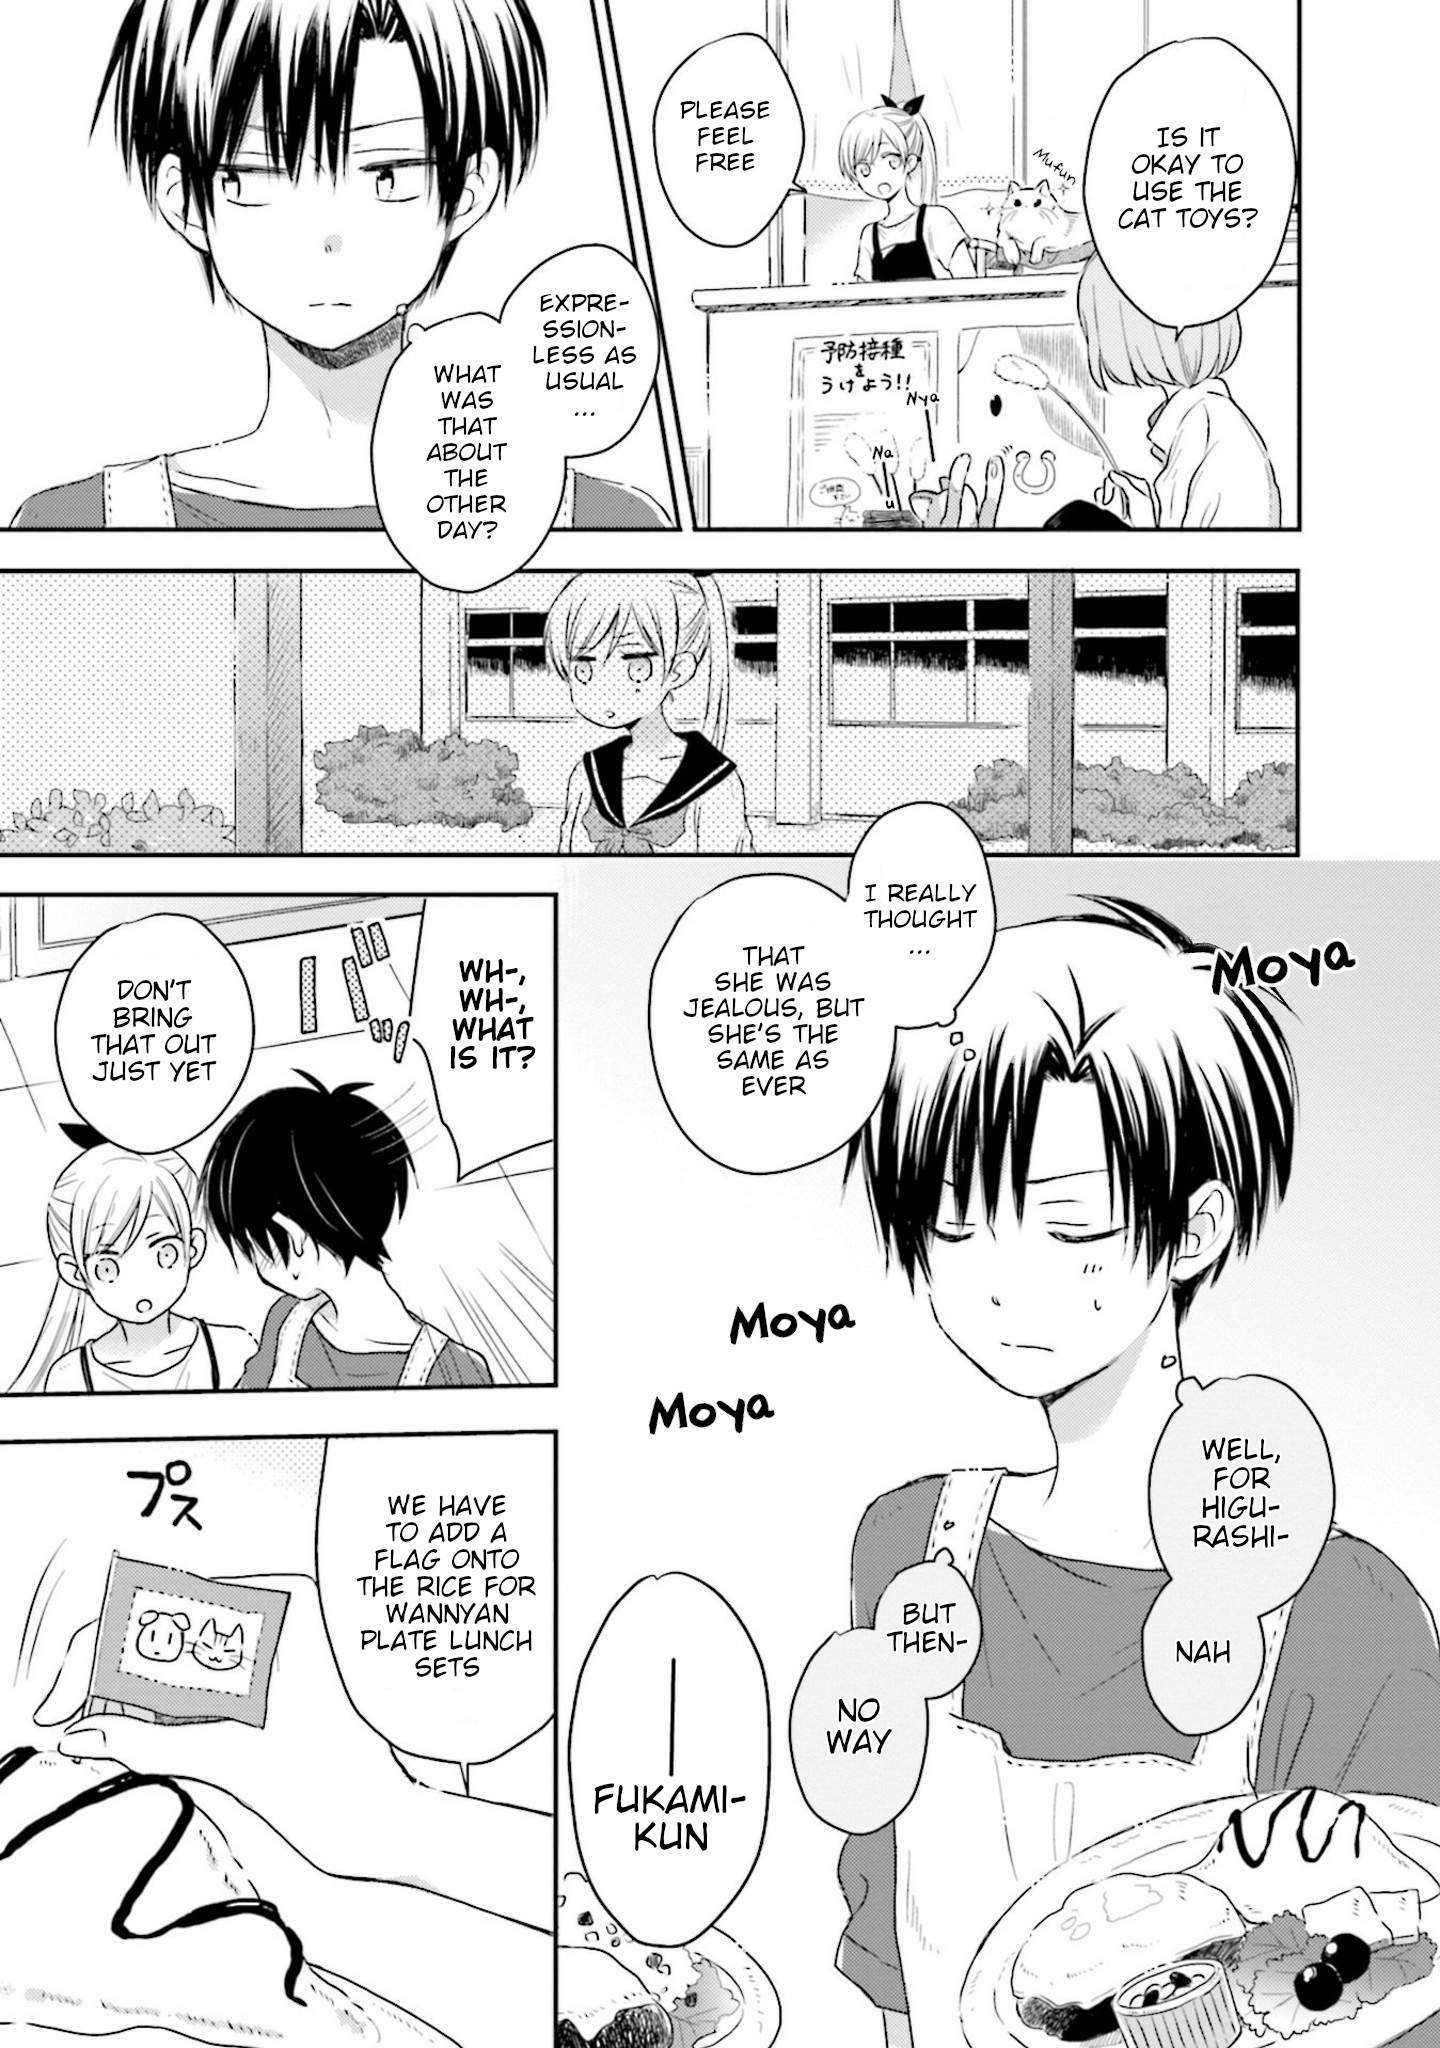 This Love Is Assumption Outside for Fukami Kun Vol.2 Chapter 12